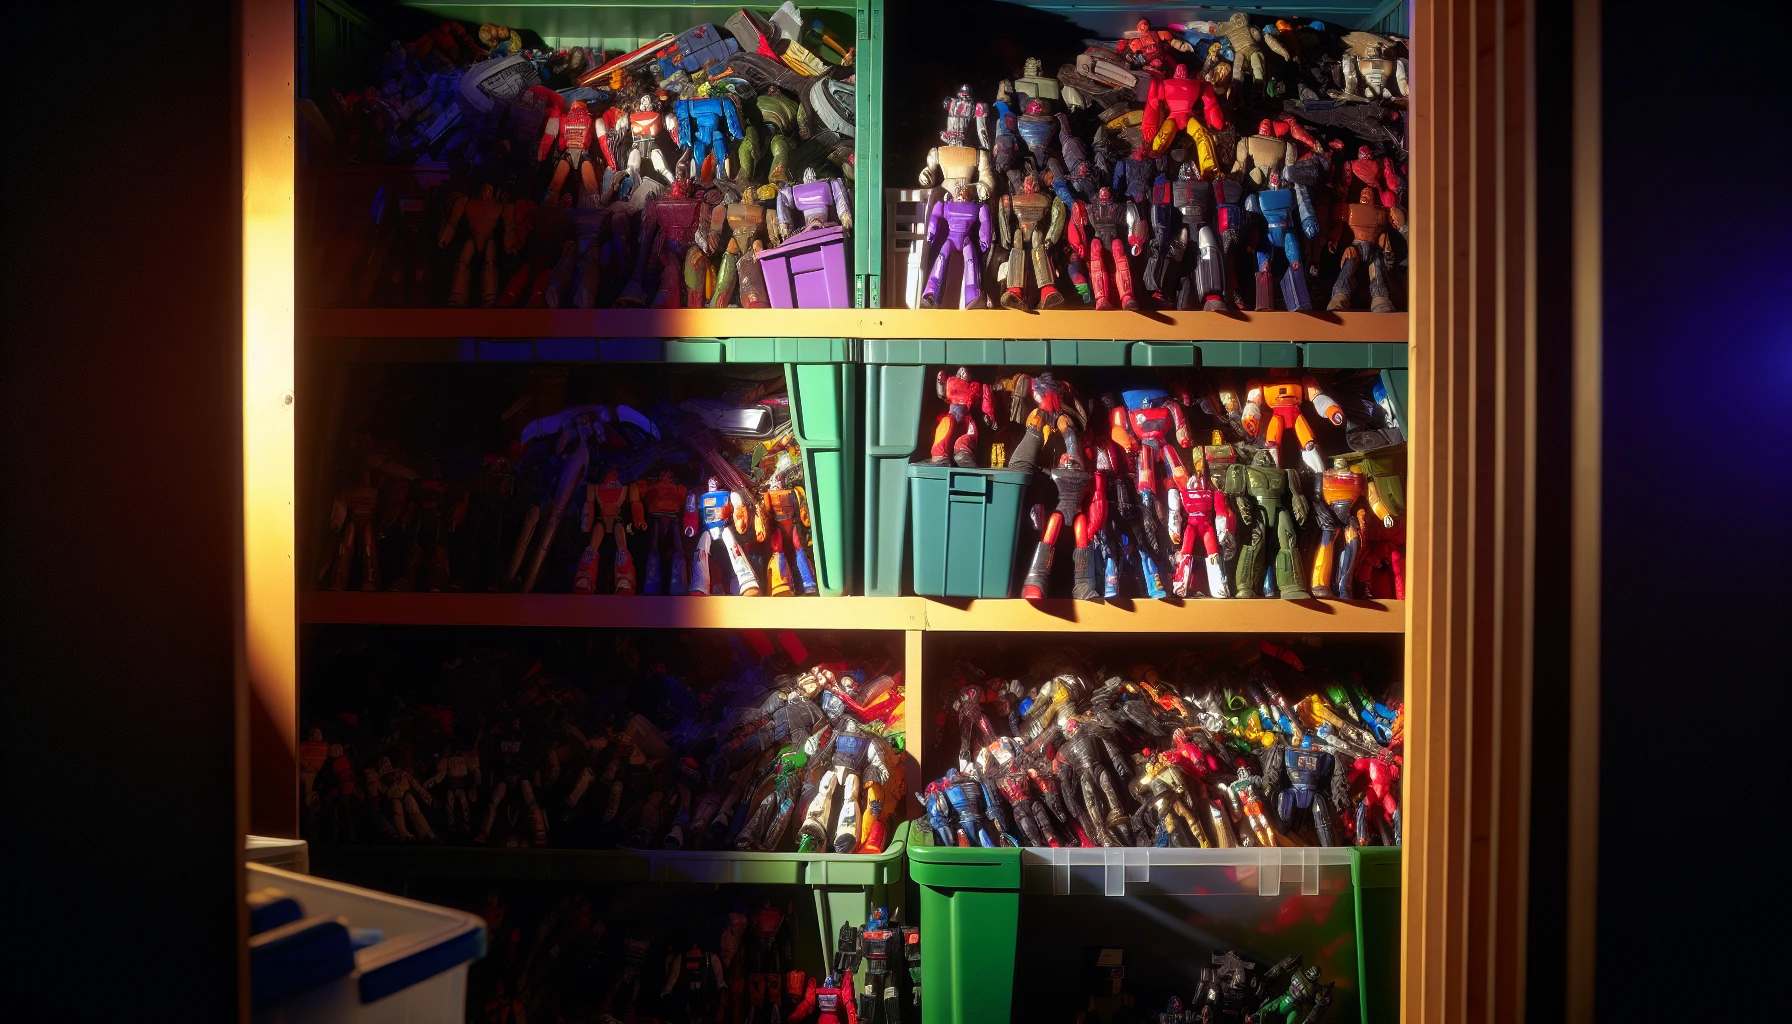 Overcrowded storage unit with action figures packed tightly